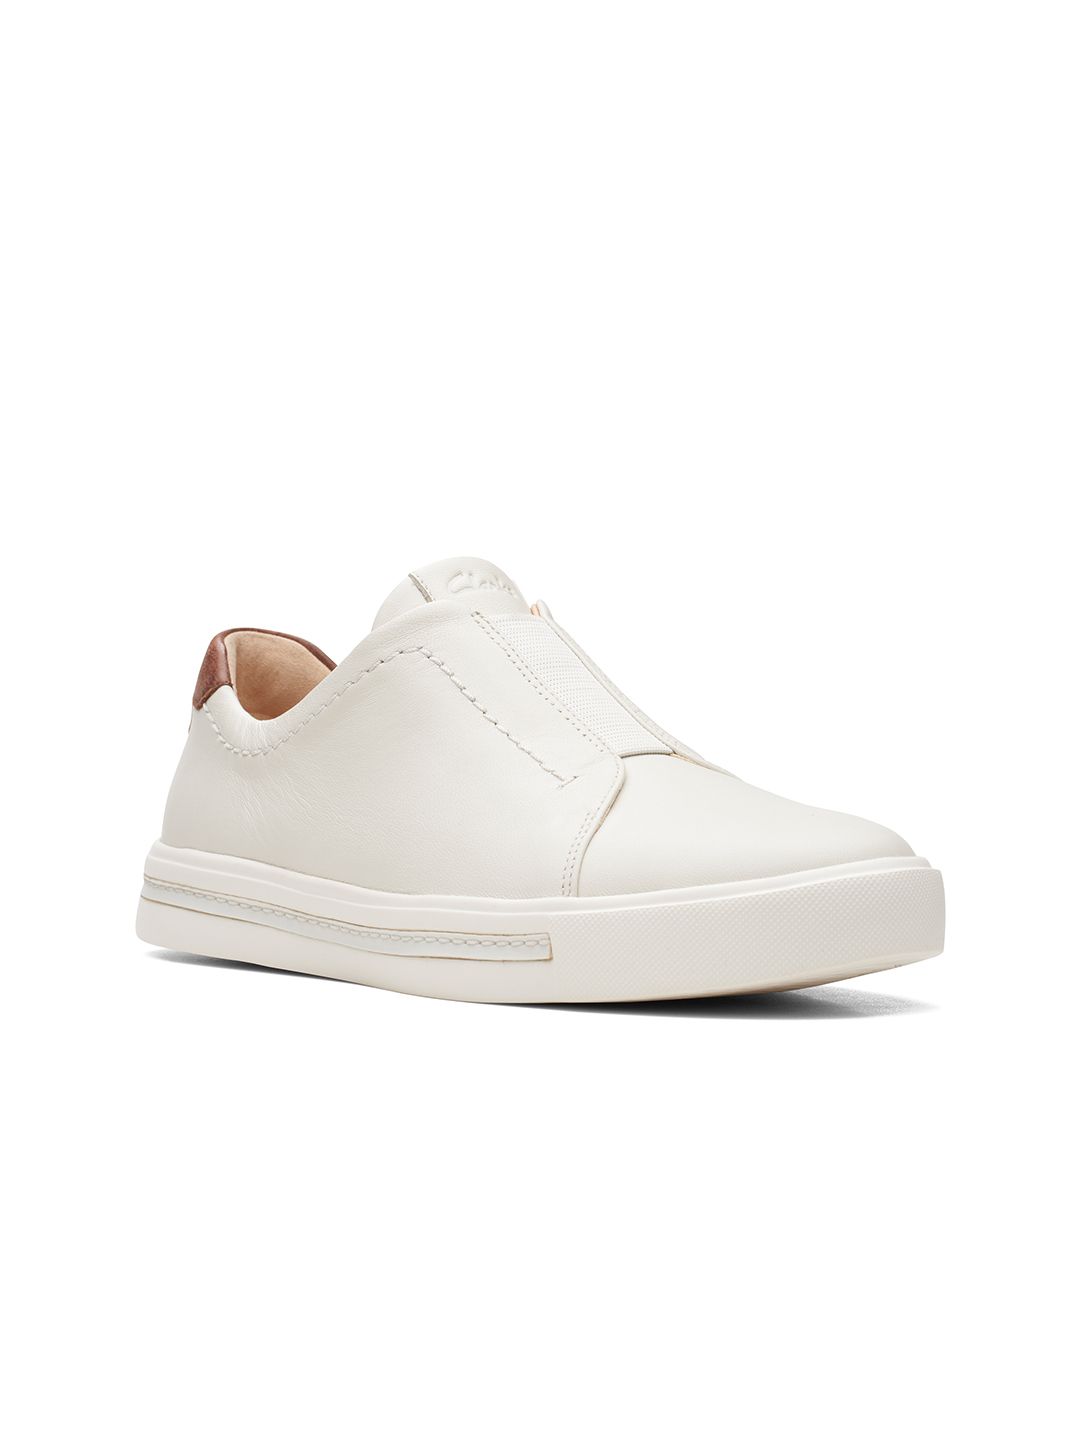 Clarks Women White Leather Slip-On Sneakers Price in India